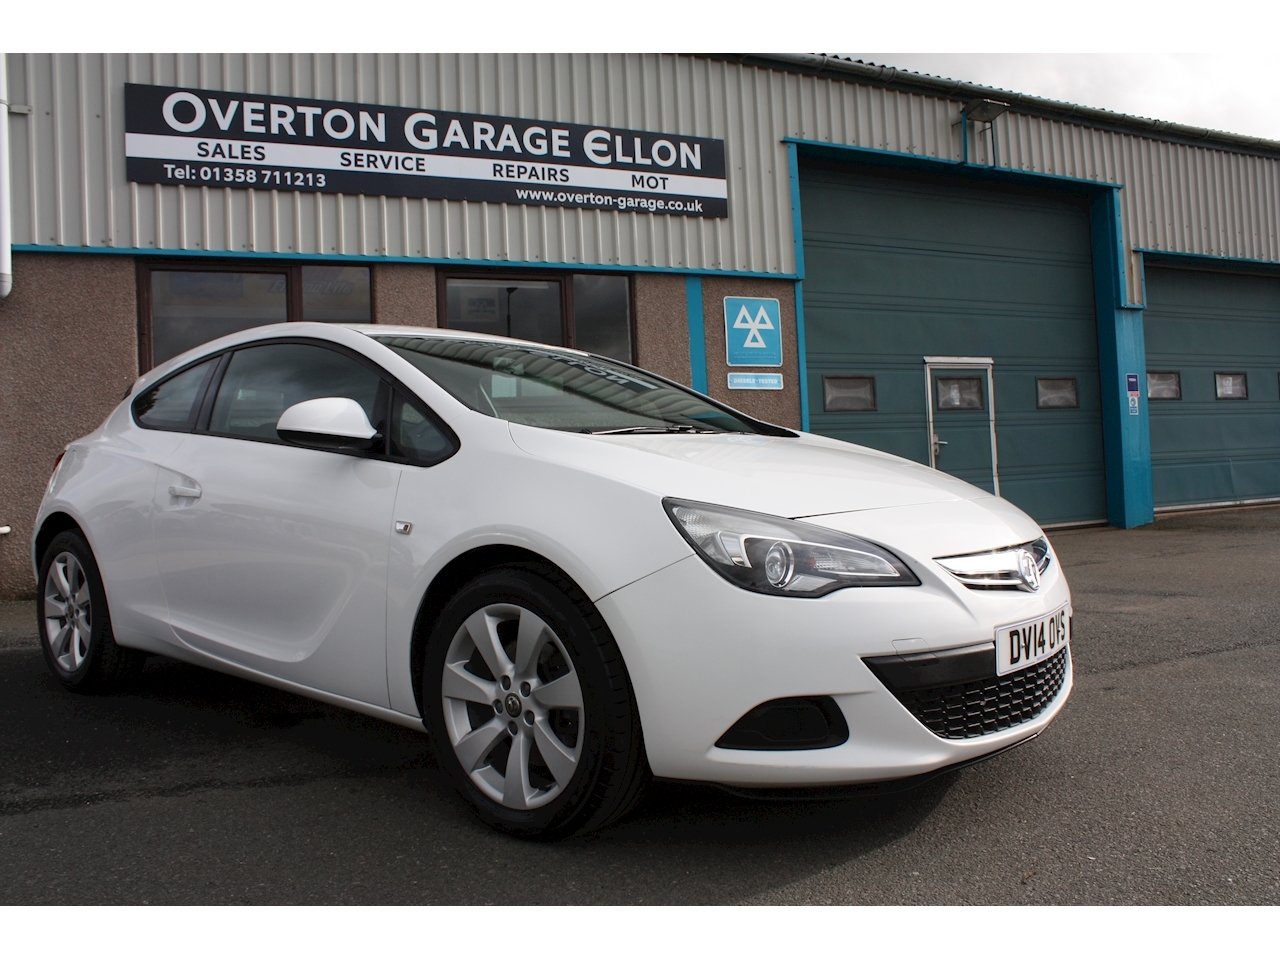 1.4T 16V Sport Coupe 3dr Petrol (s/s) (120 ps)